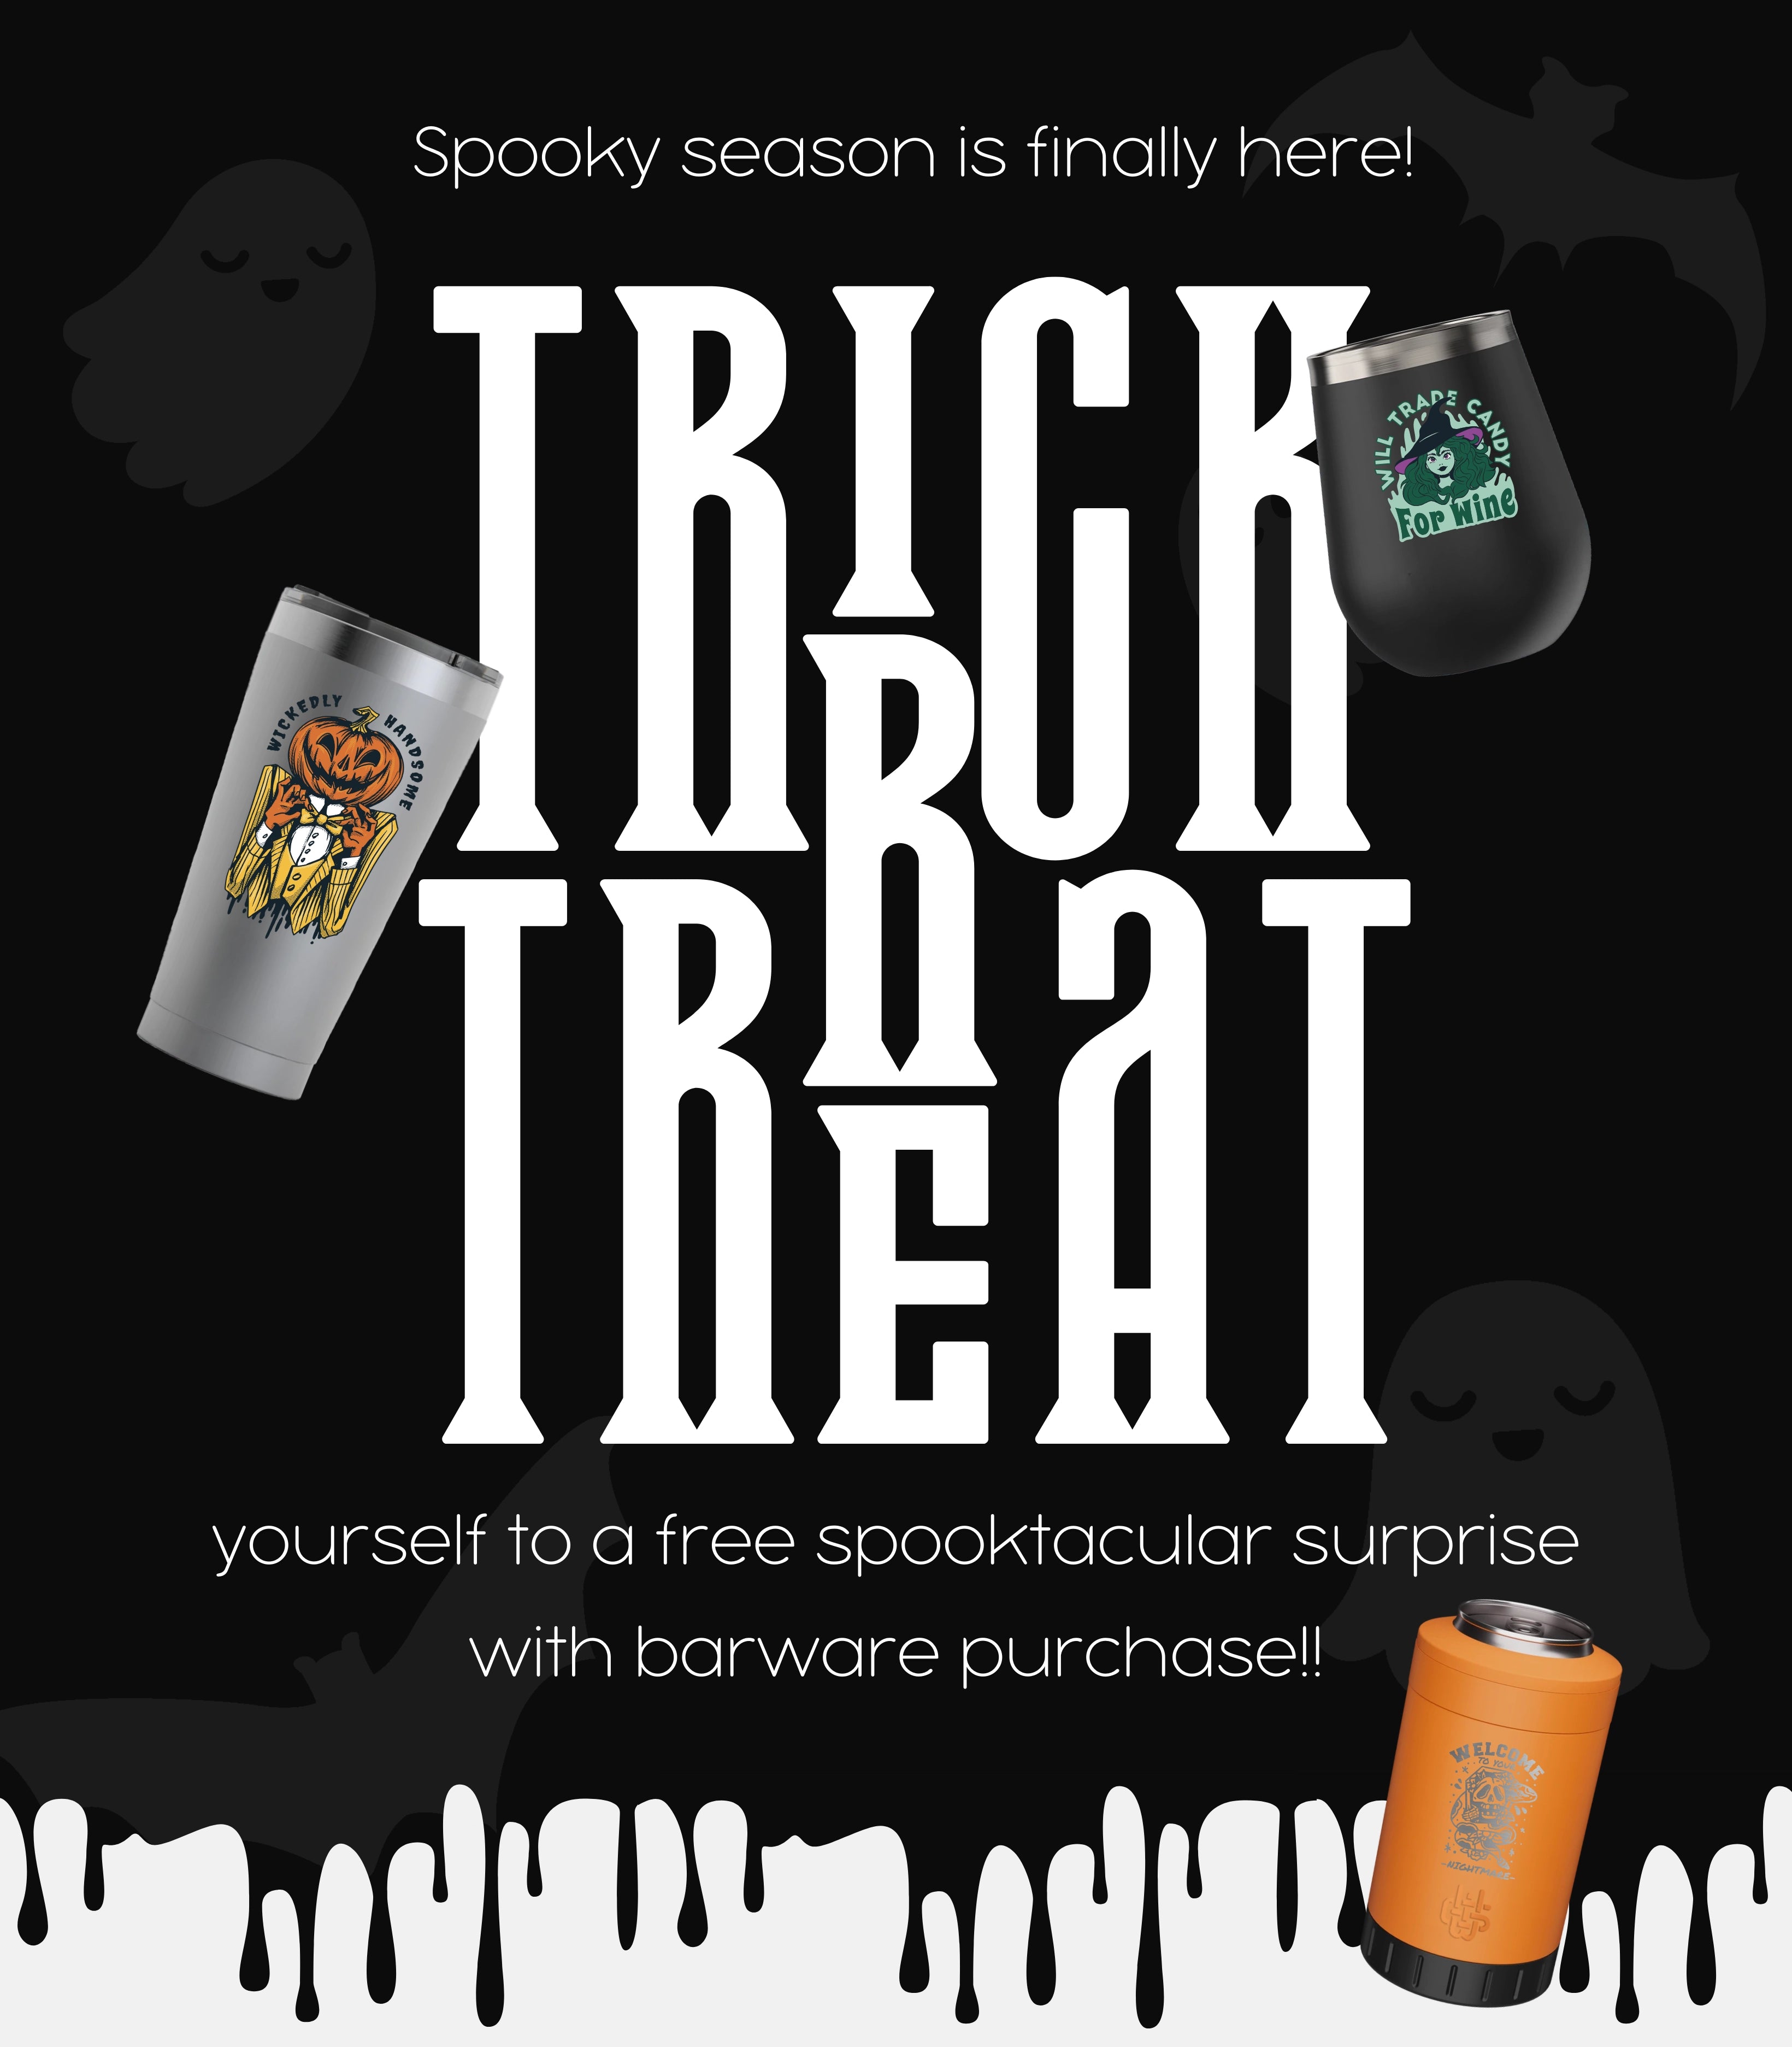 halloween graphic for trick or treat promotion including a free gift with purchase of a custom designed barware item